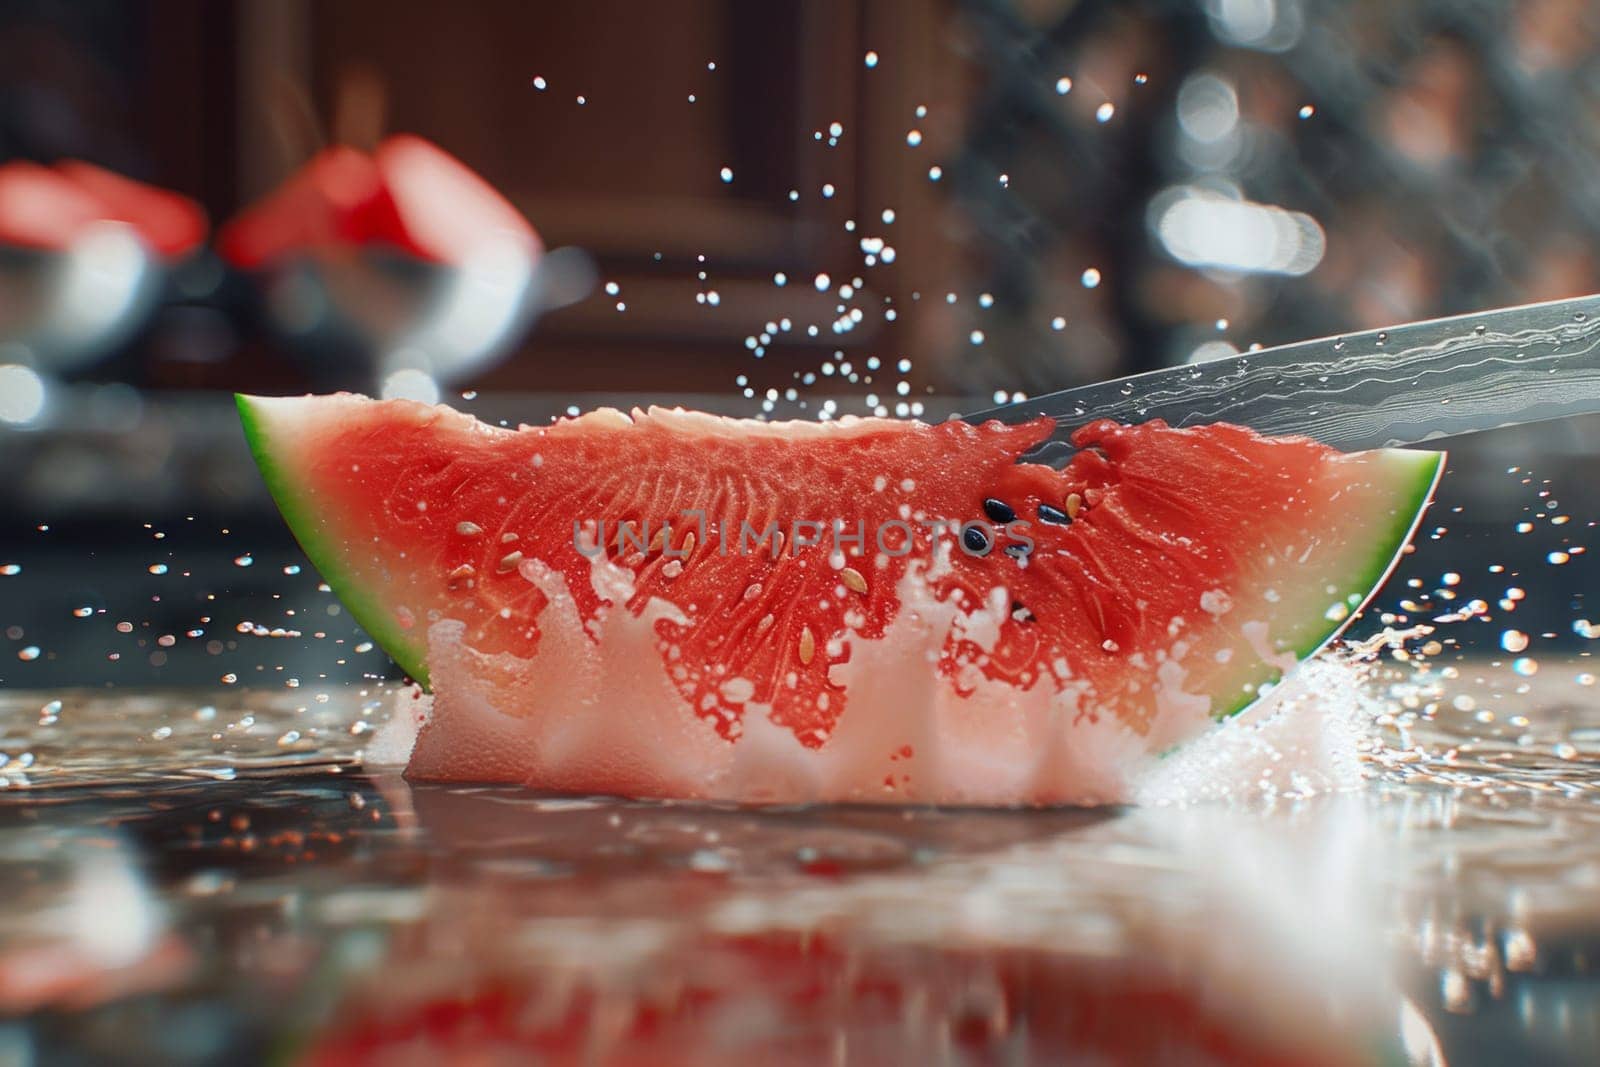 A knife slices through a vibrant watermelon, revealing the succulent fruit inside. The juicy goodness spills out as the blade cuts through.